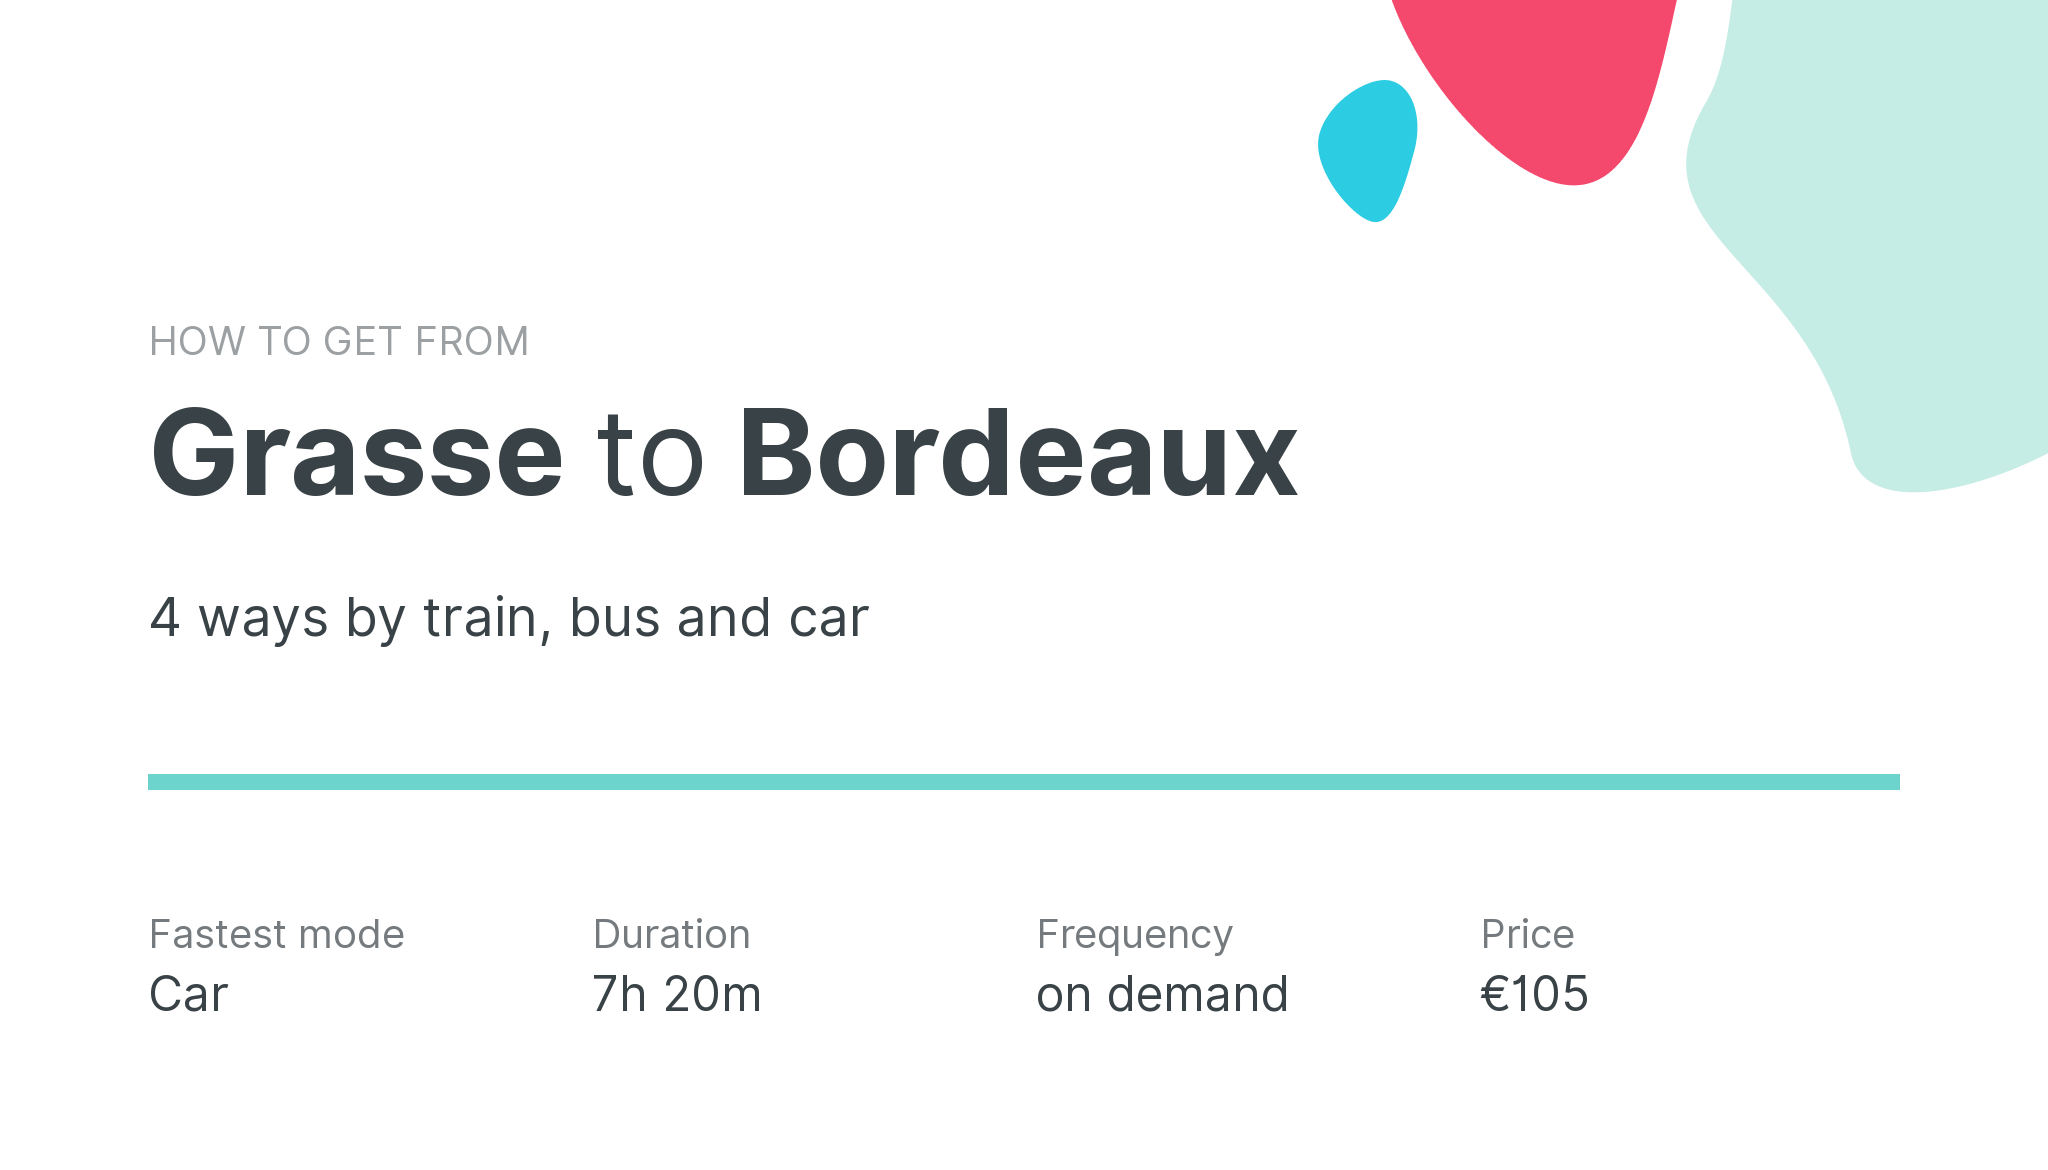 How do I get from Grasse to Bordeaux